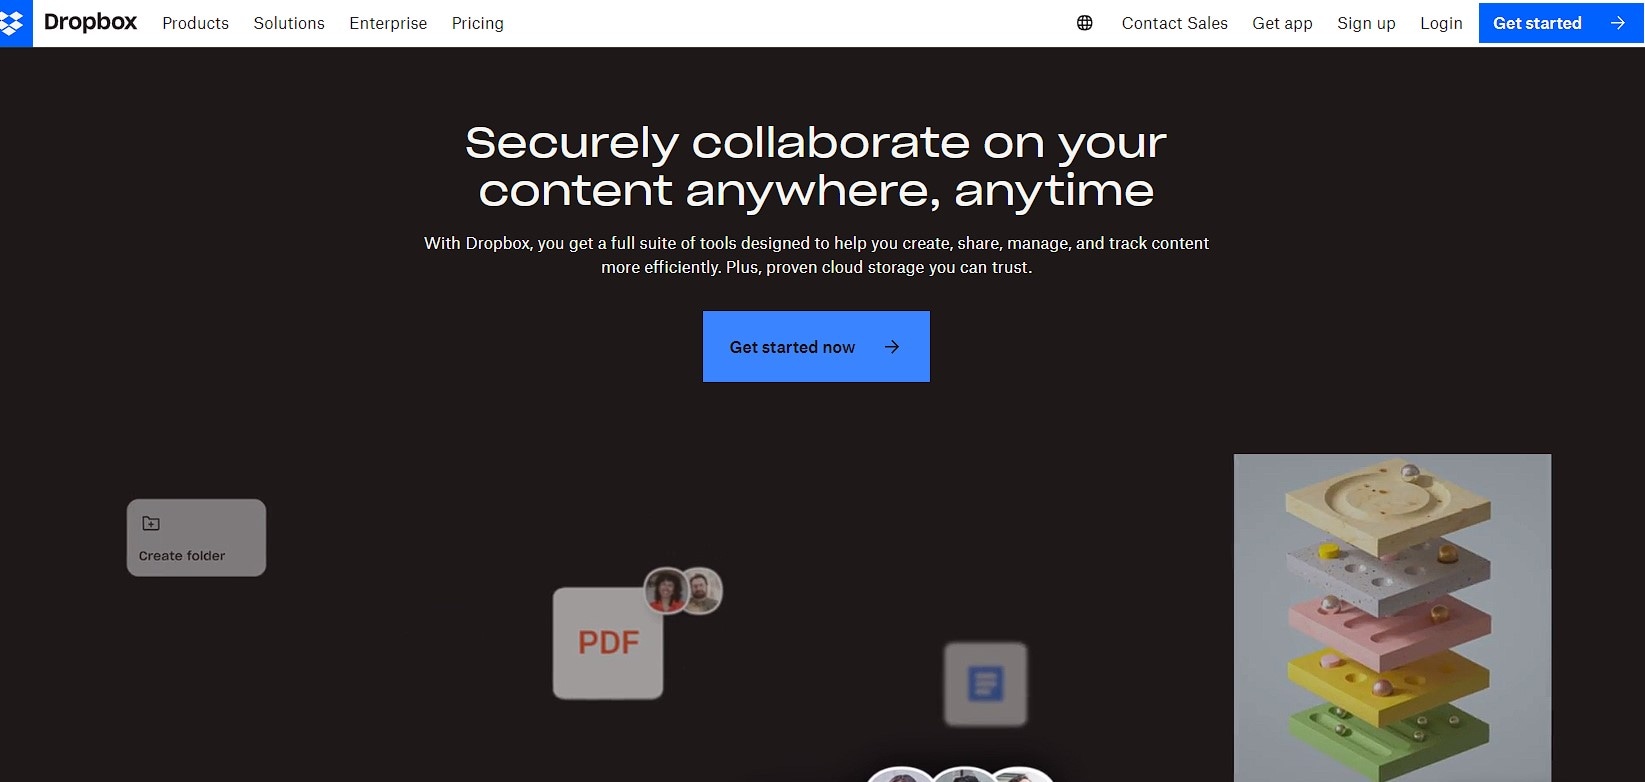 Dropbox for secure collaboration and time management